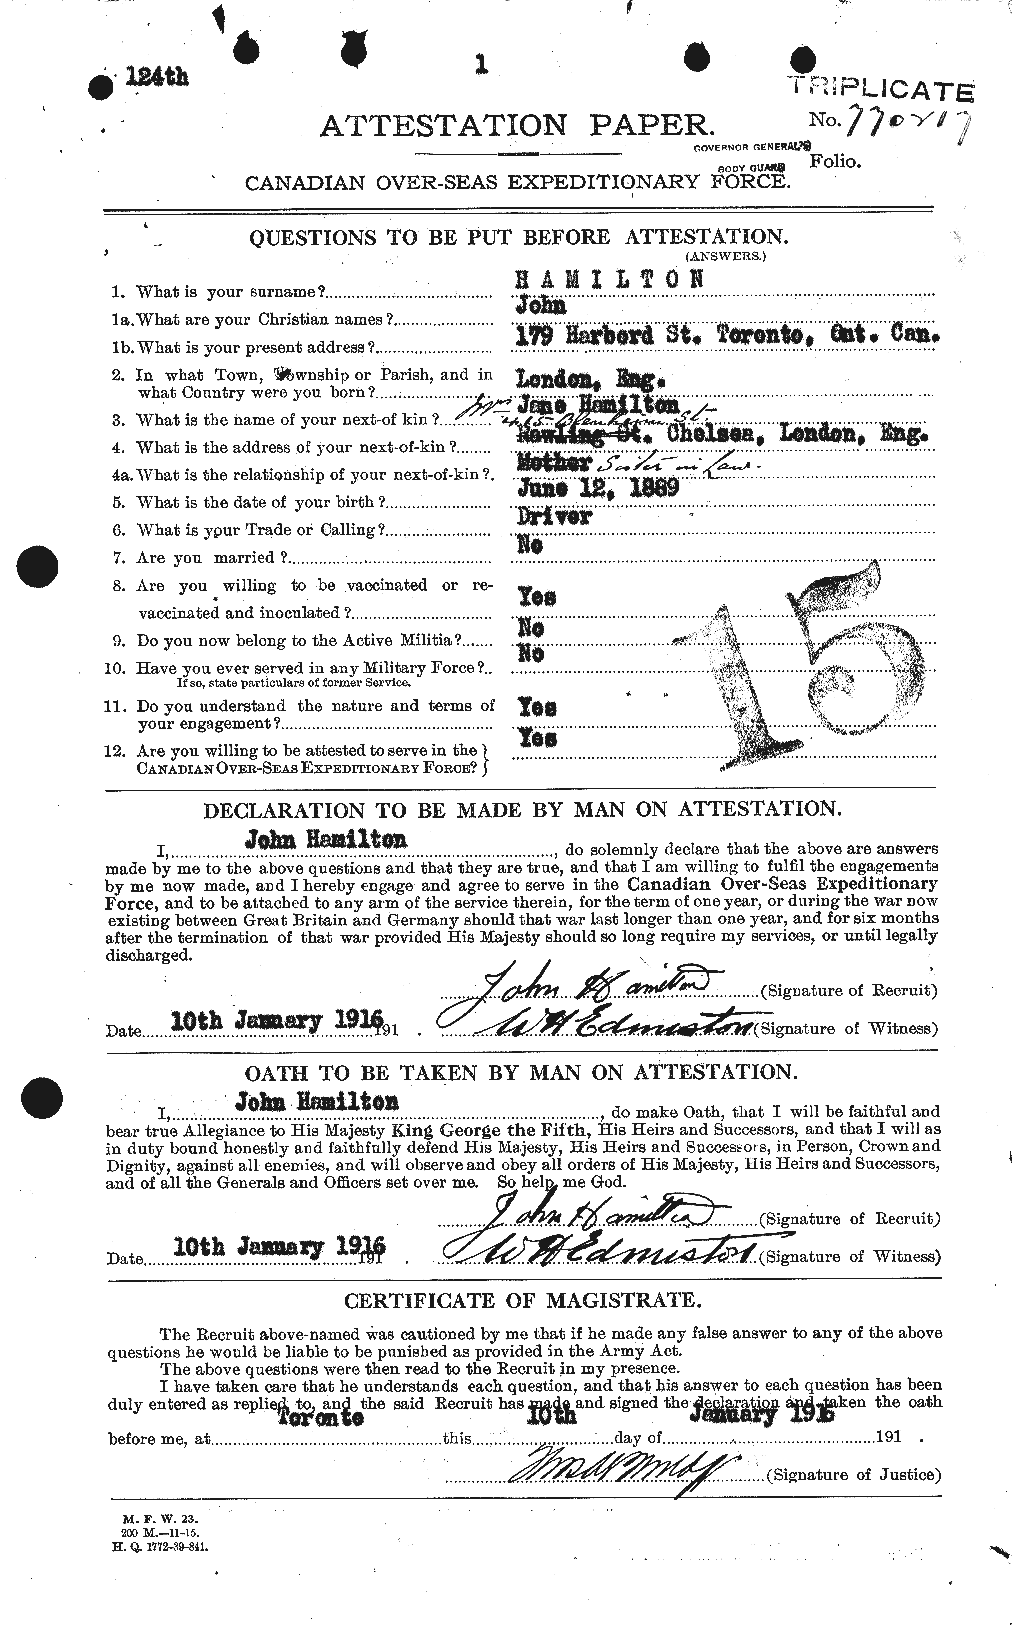 Personnel Records of the First World War - CEF 373048a